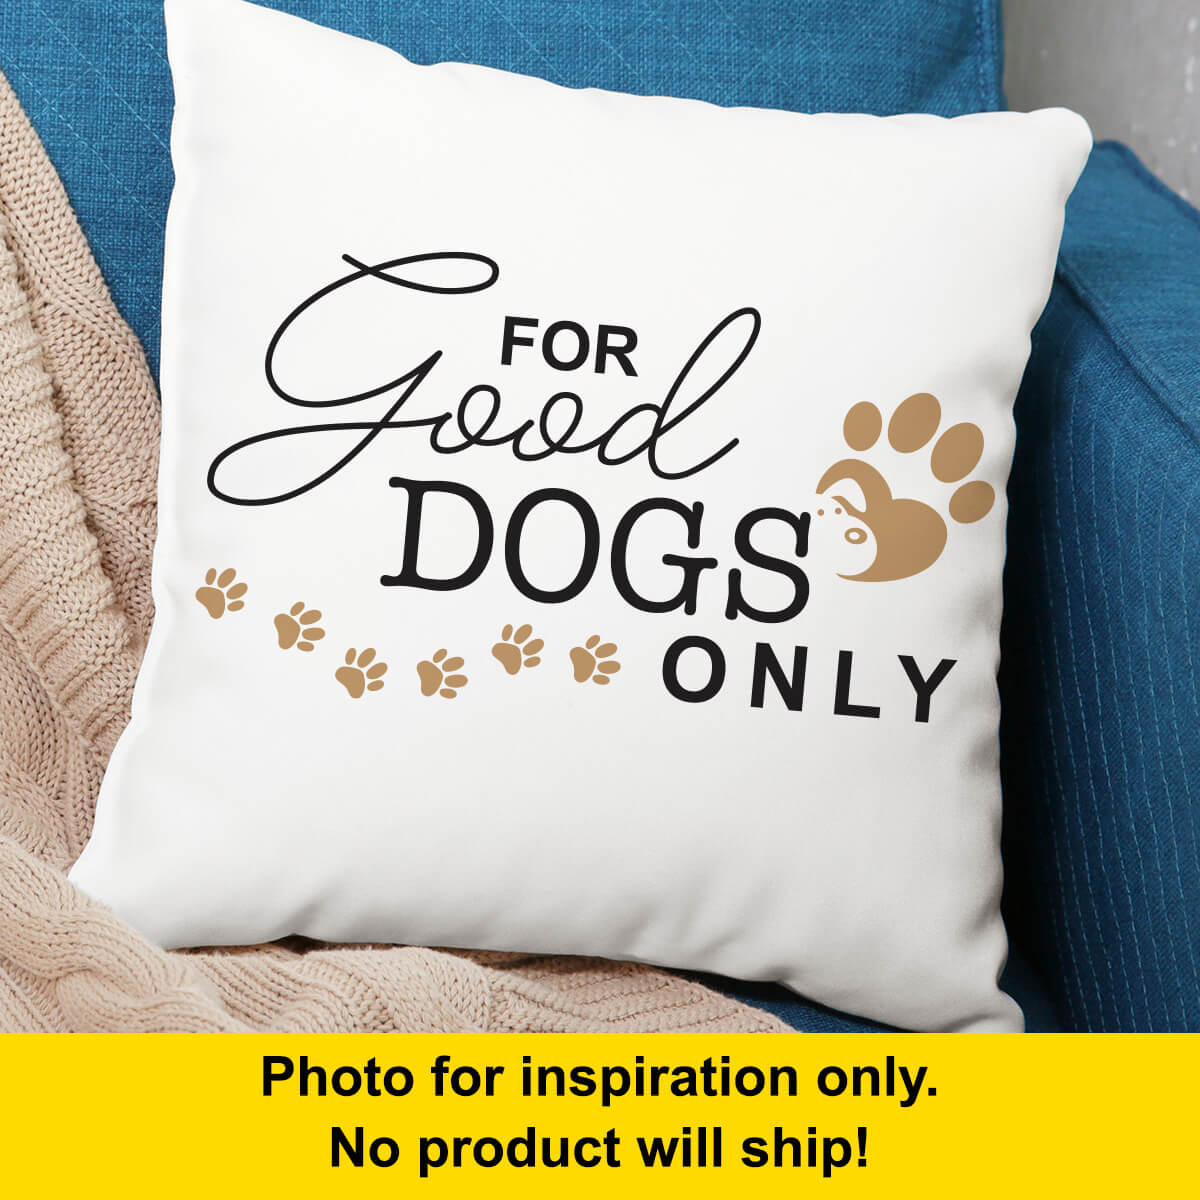 For Good Dogs Only throw pillow on couch